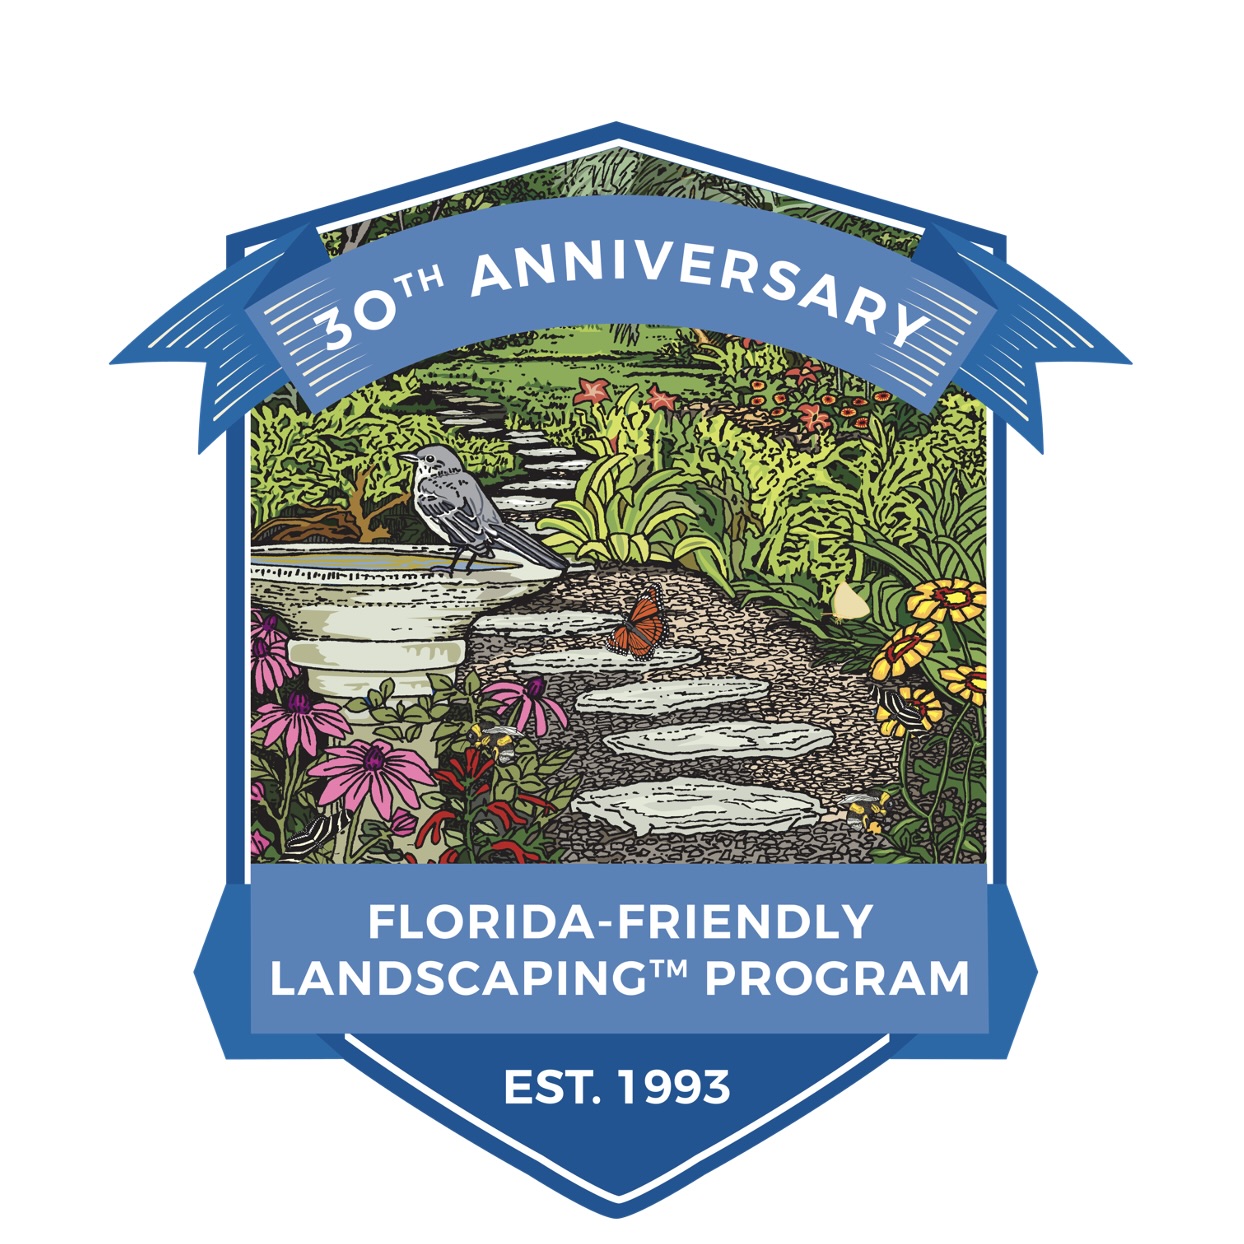 30th Anniversary of the Florida-Friendly Landscaping Program